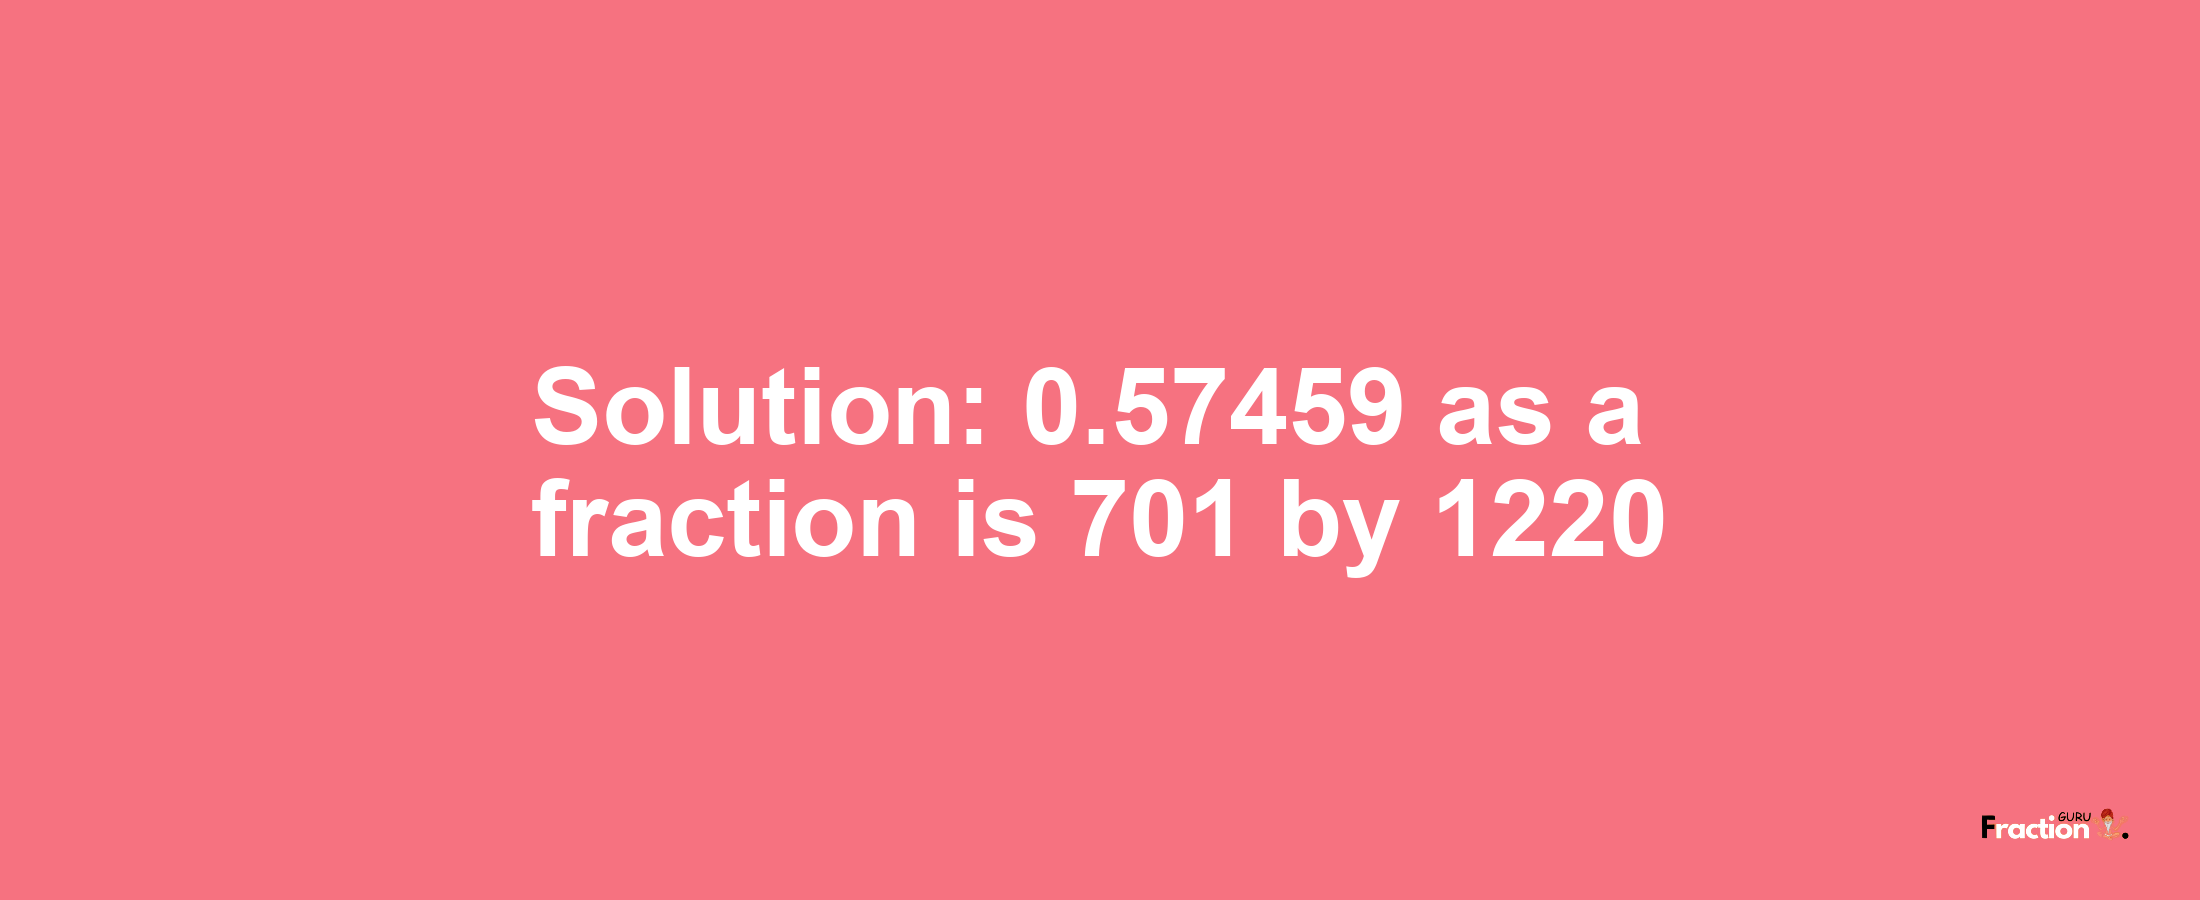 Solution:0.57459 as a fraction is 701/1220